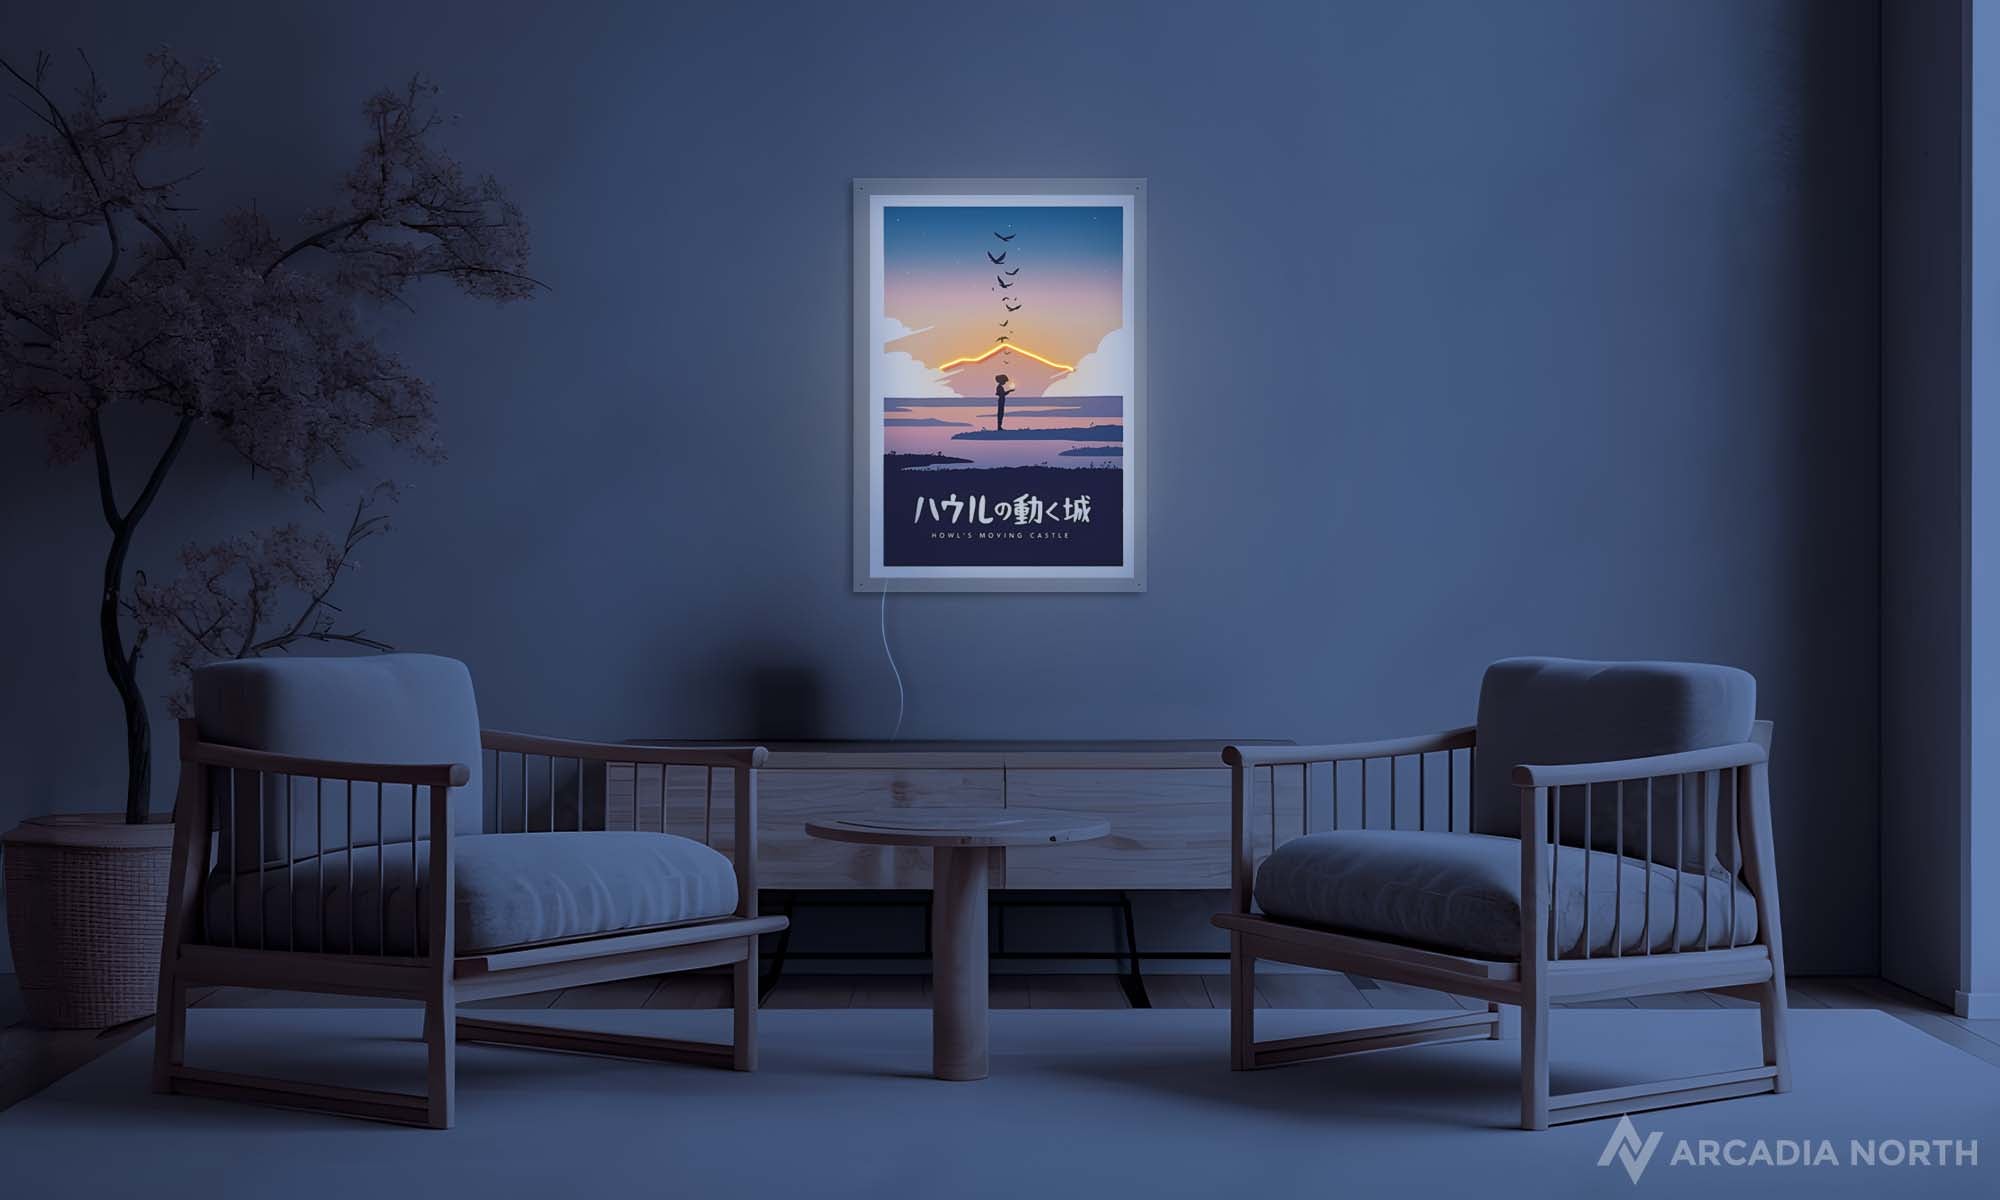 Modern living room with a Studio Ghibli Howl's Moving Castle minimalistic acrylic poster with a neon LED light on the wall